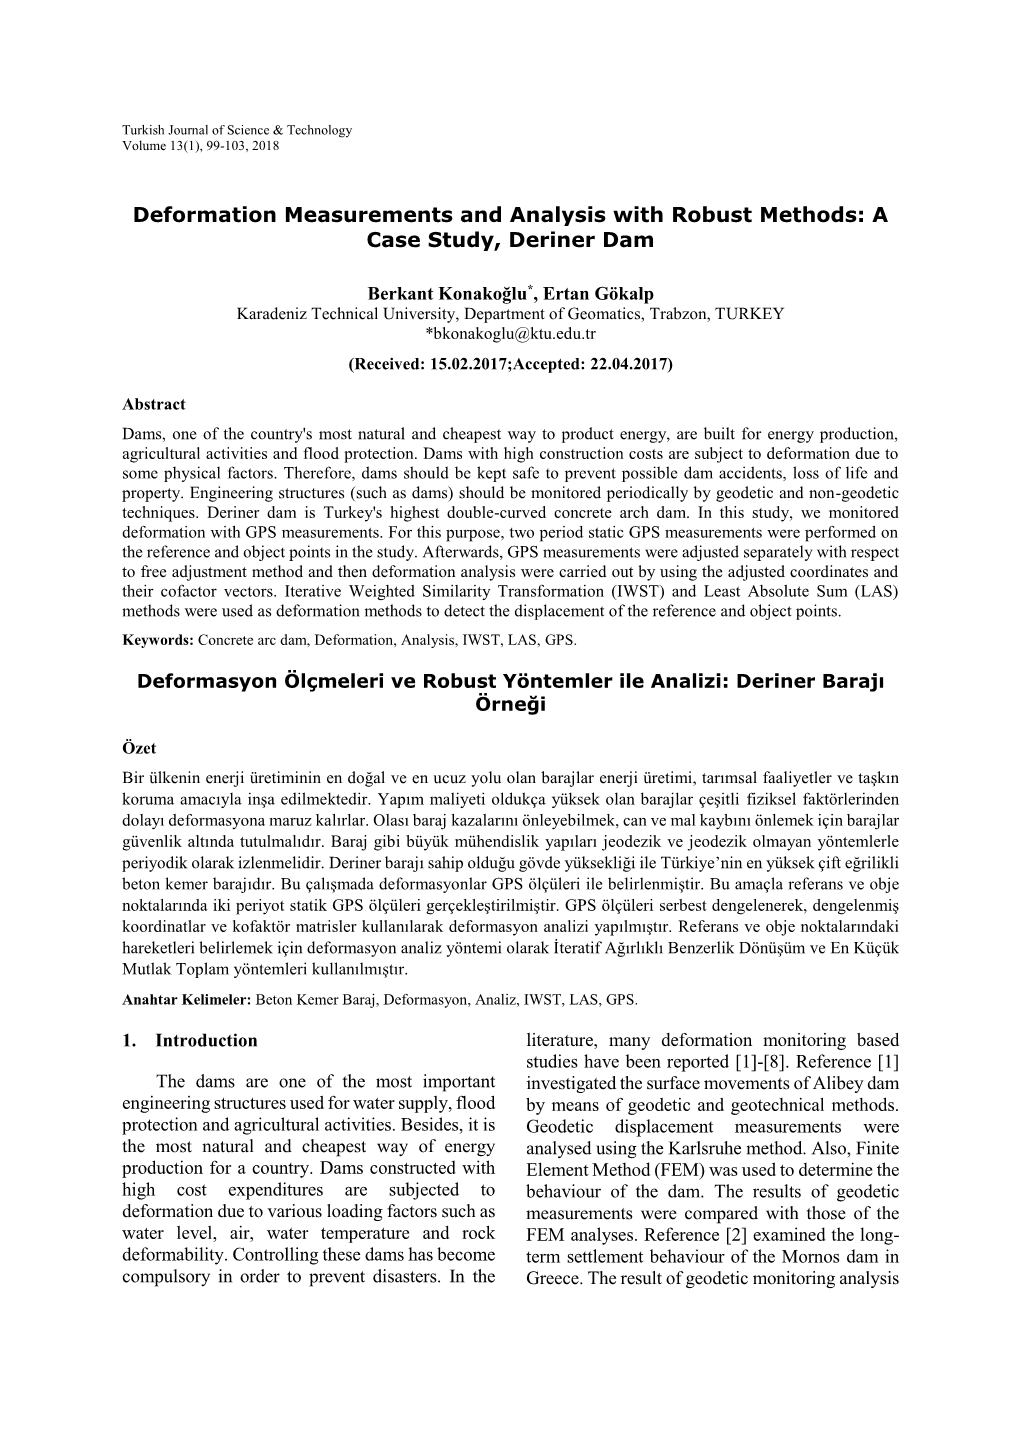 Deformation Measurements and Analysis with Robust Methods: a Case Study, Deriner Dam